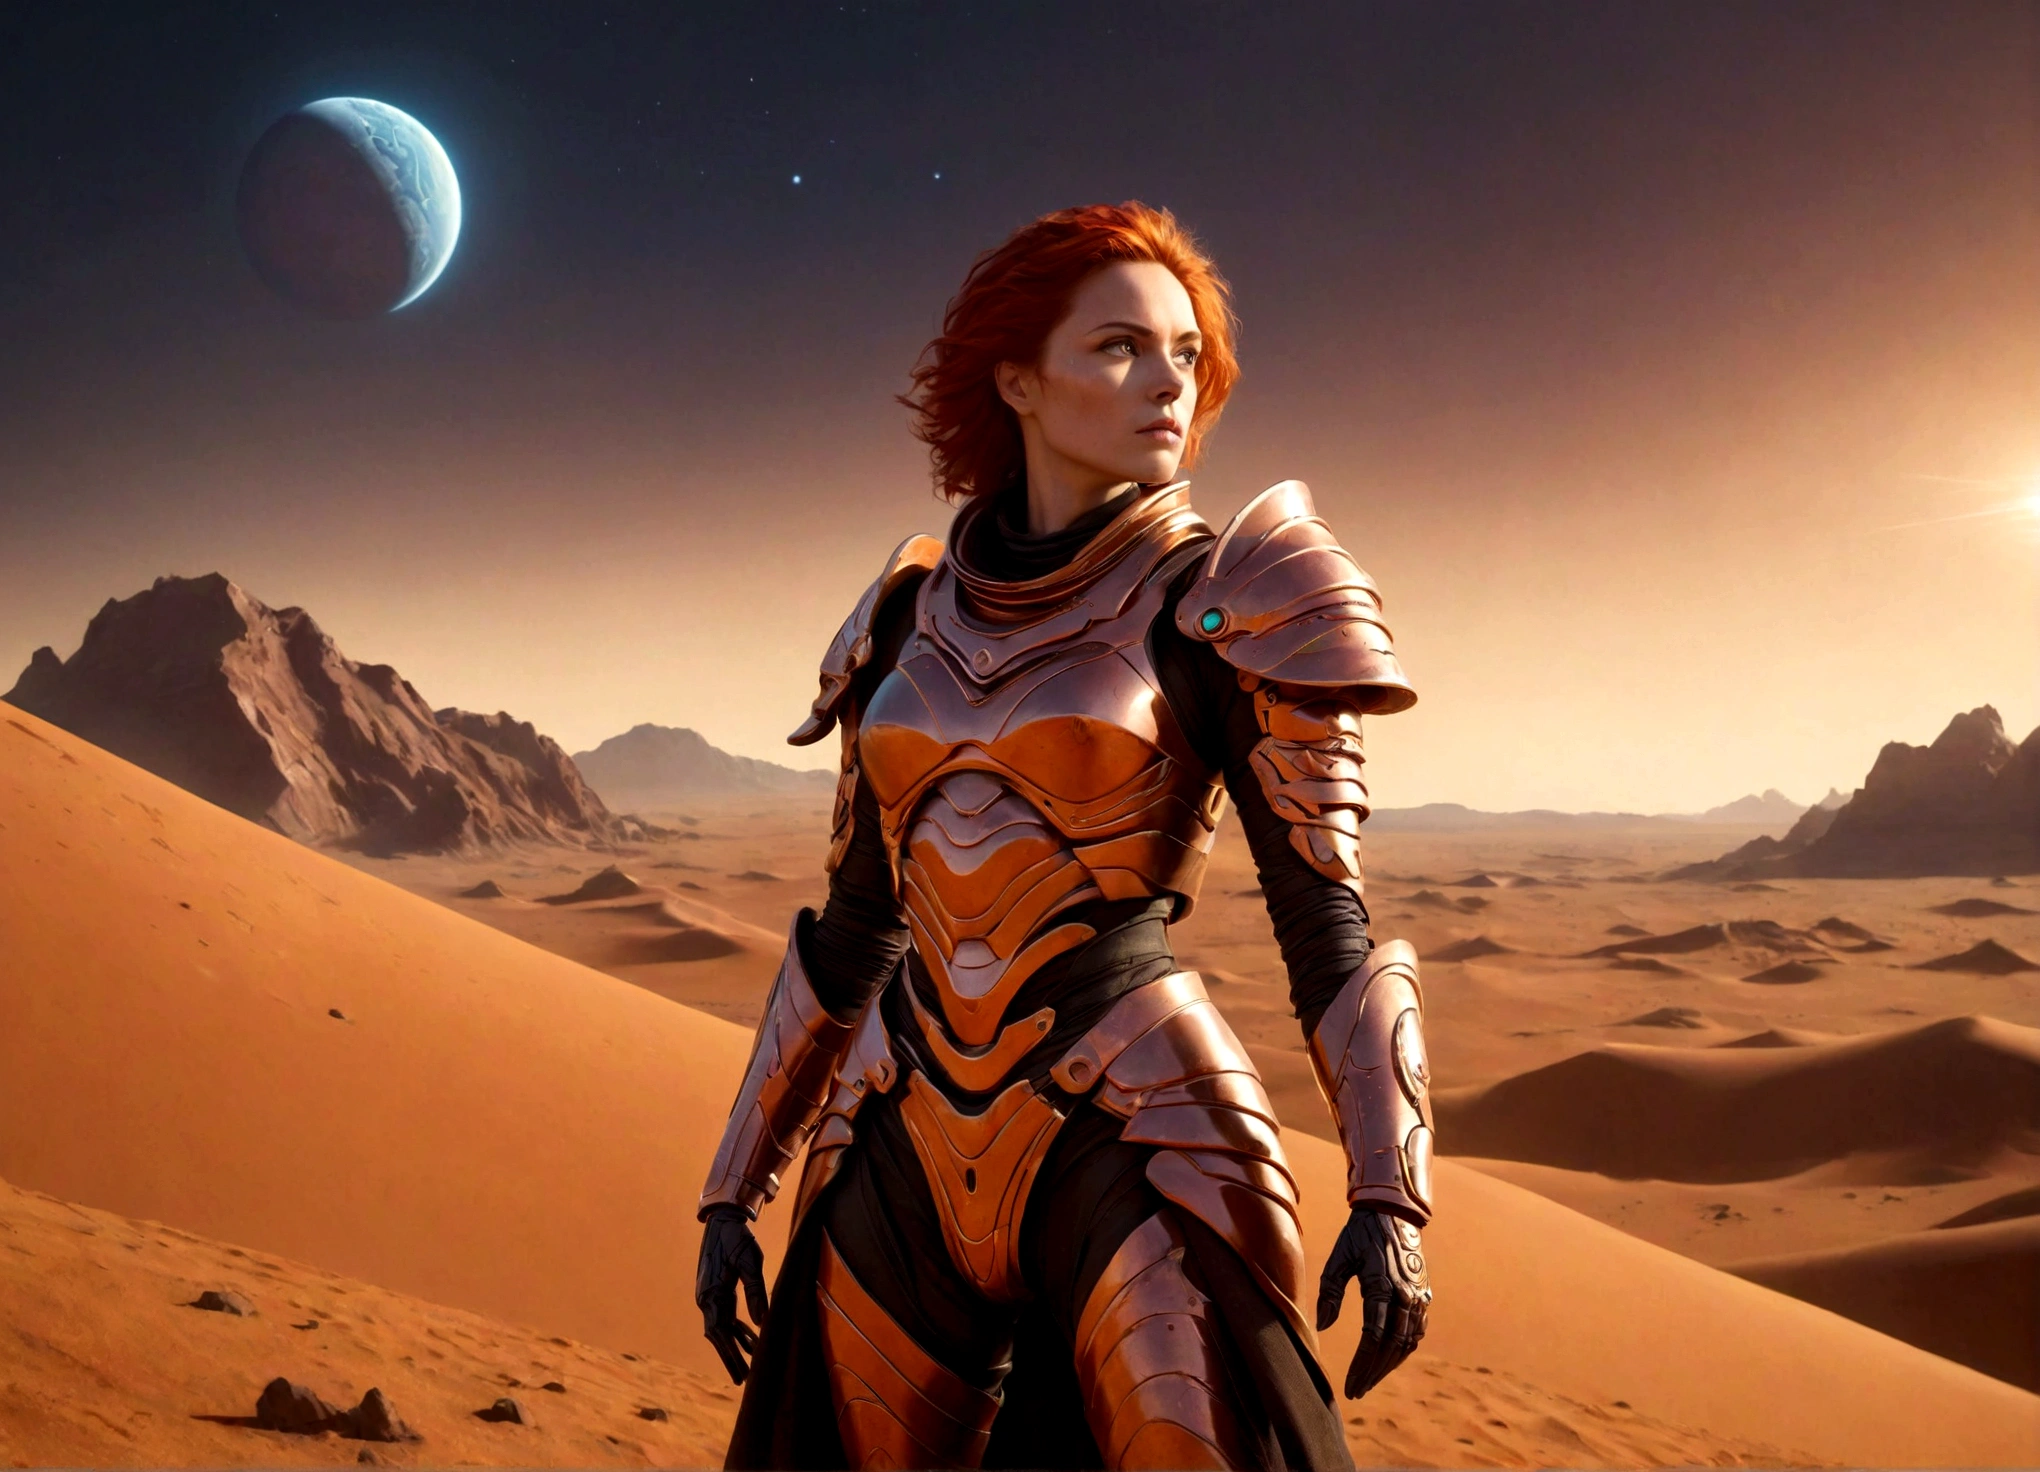 a warrior queen on Mars, Dune-style, highly detailed armor, futuristic Martian landscape, dramatic lighting, cinematic composition, intricate mechanical details, vibrant colors, science fiction, photorealistic